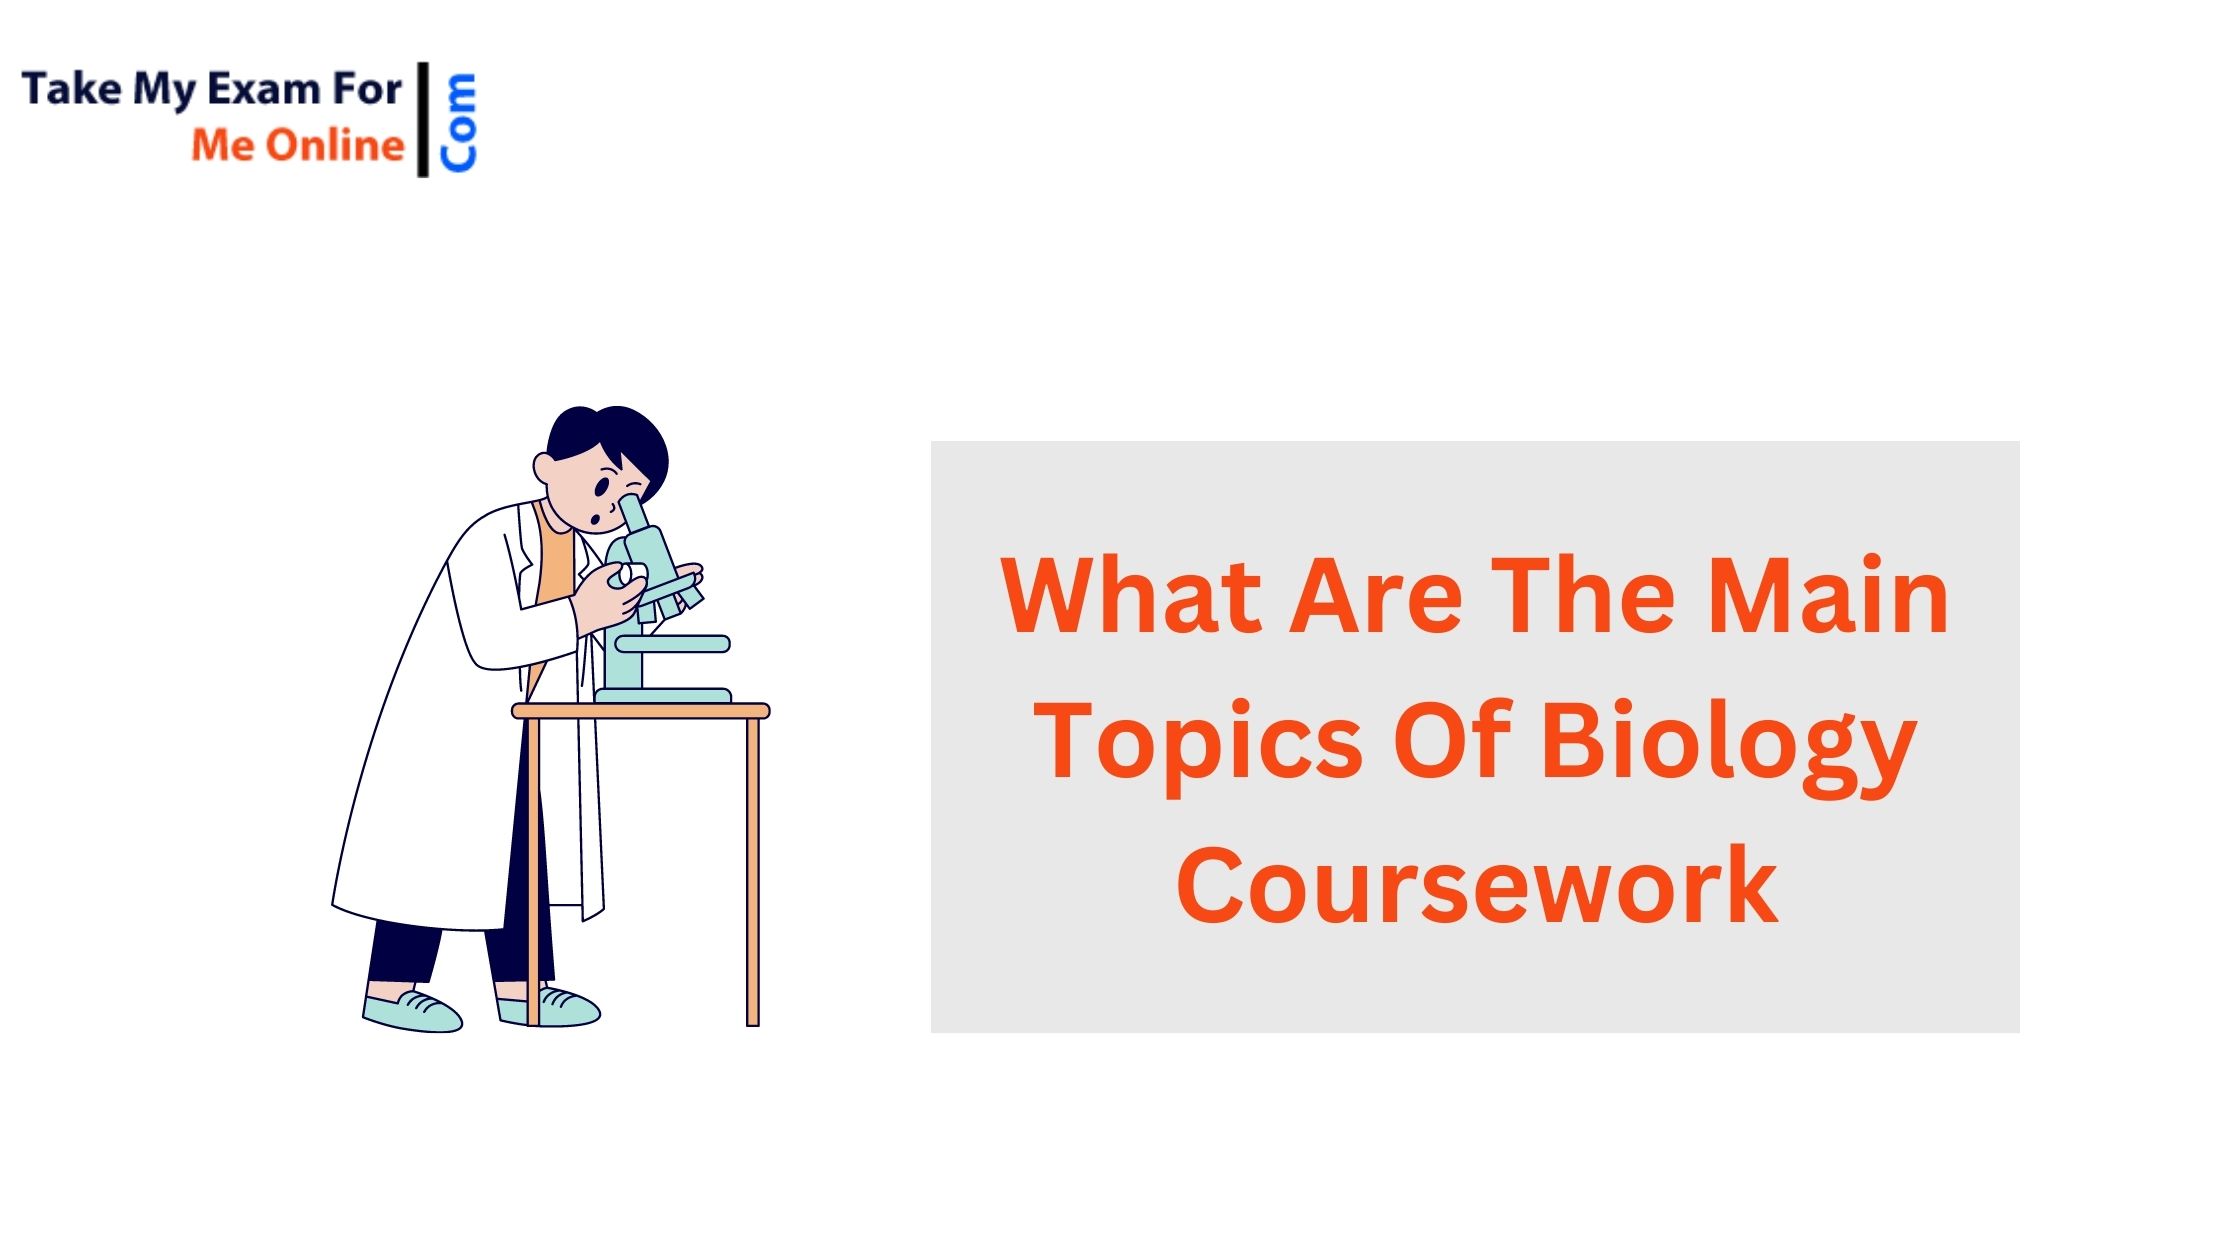 What Are The Main Topics Of Biology Coursework